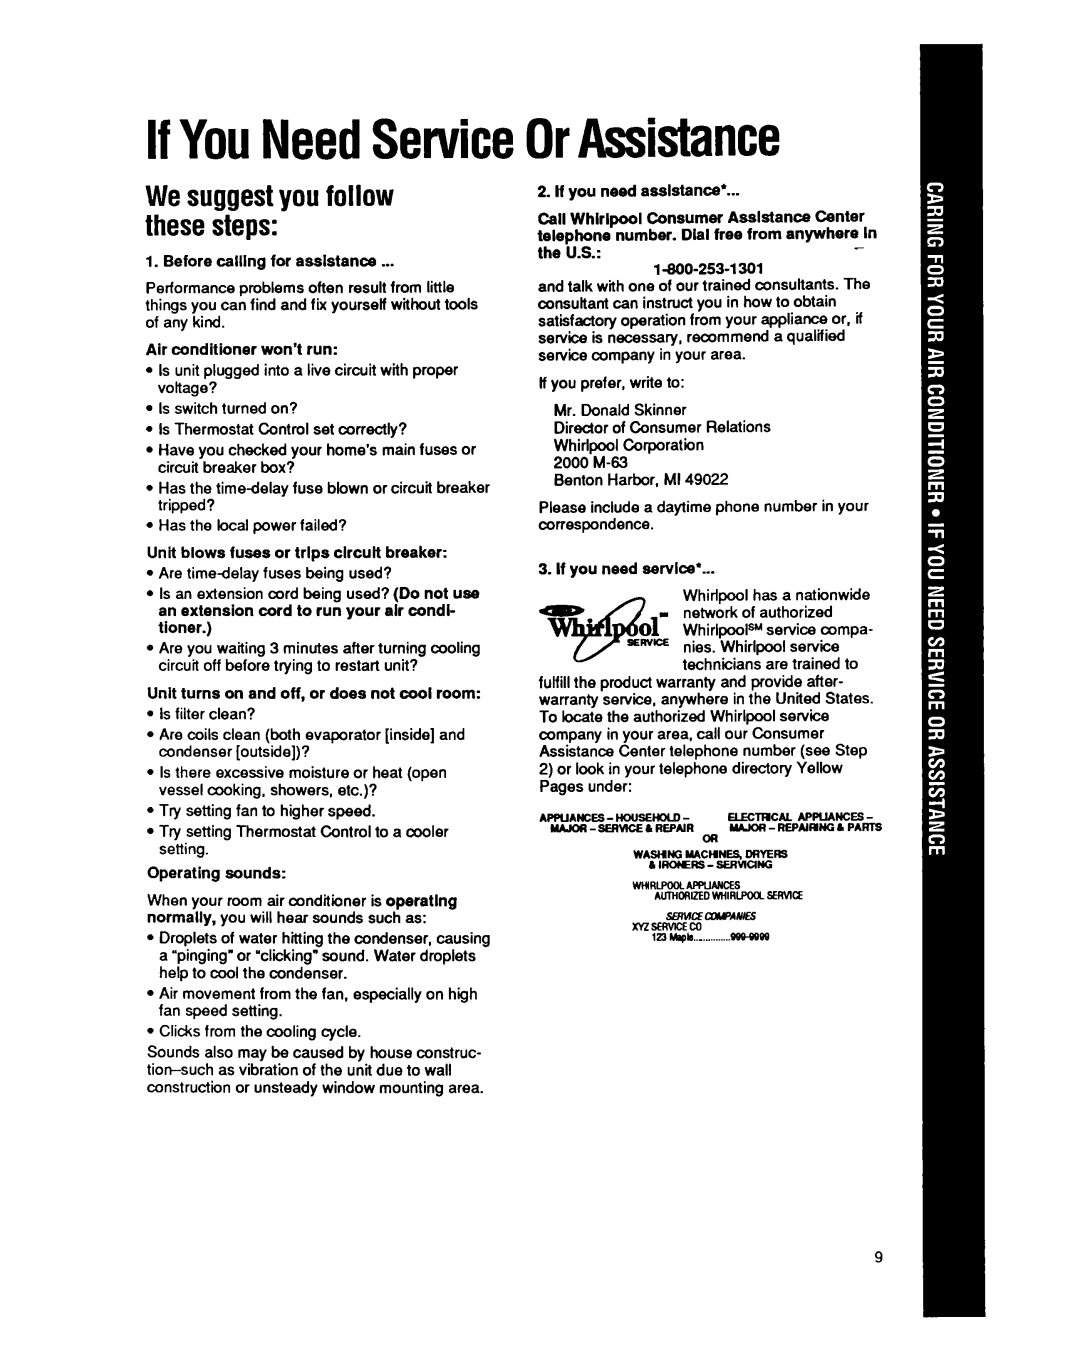 Whirlpool AMQ062, ACQ052 manual IfYouNeedServiceOrAssistance, Wesuggestyou follow thesesteps, Before calling for assistance 